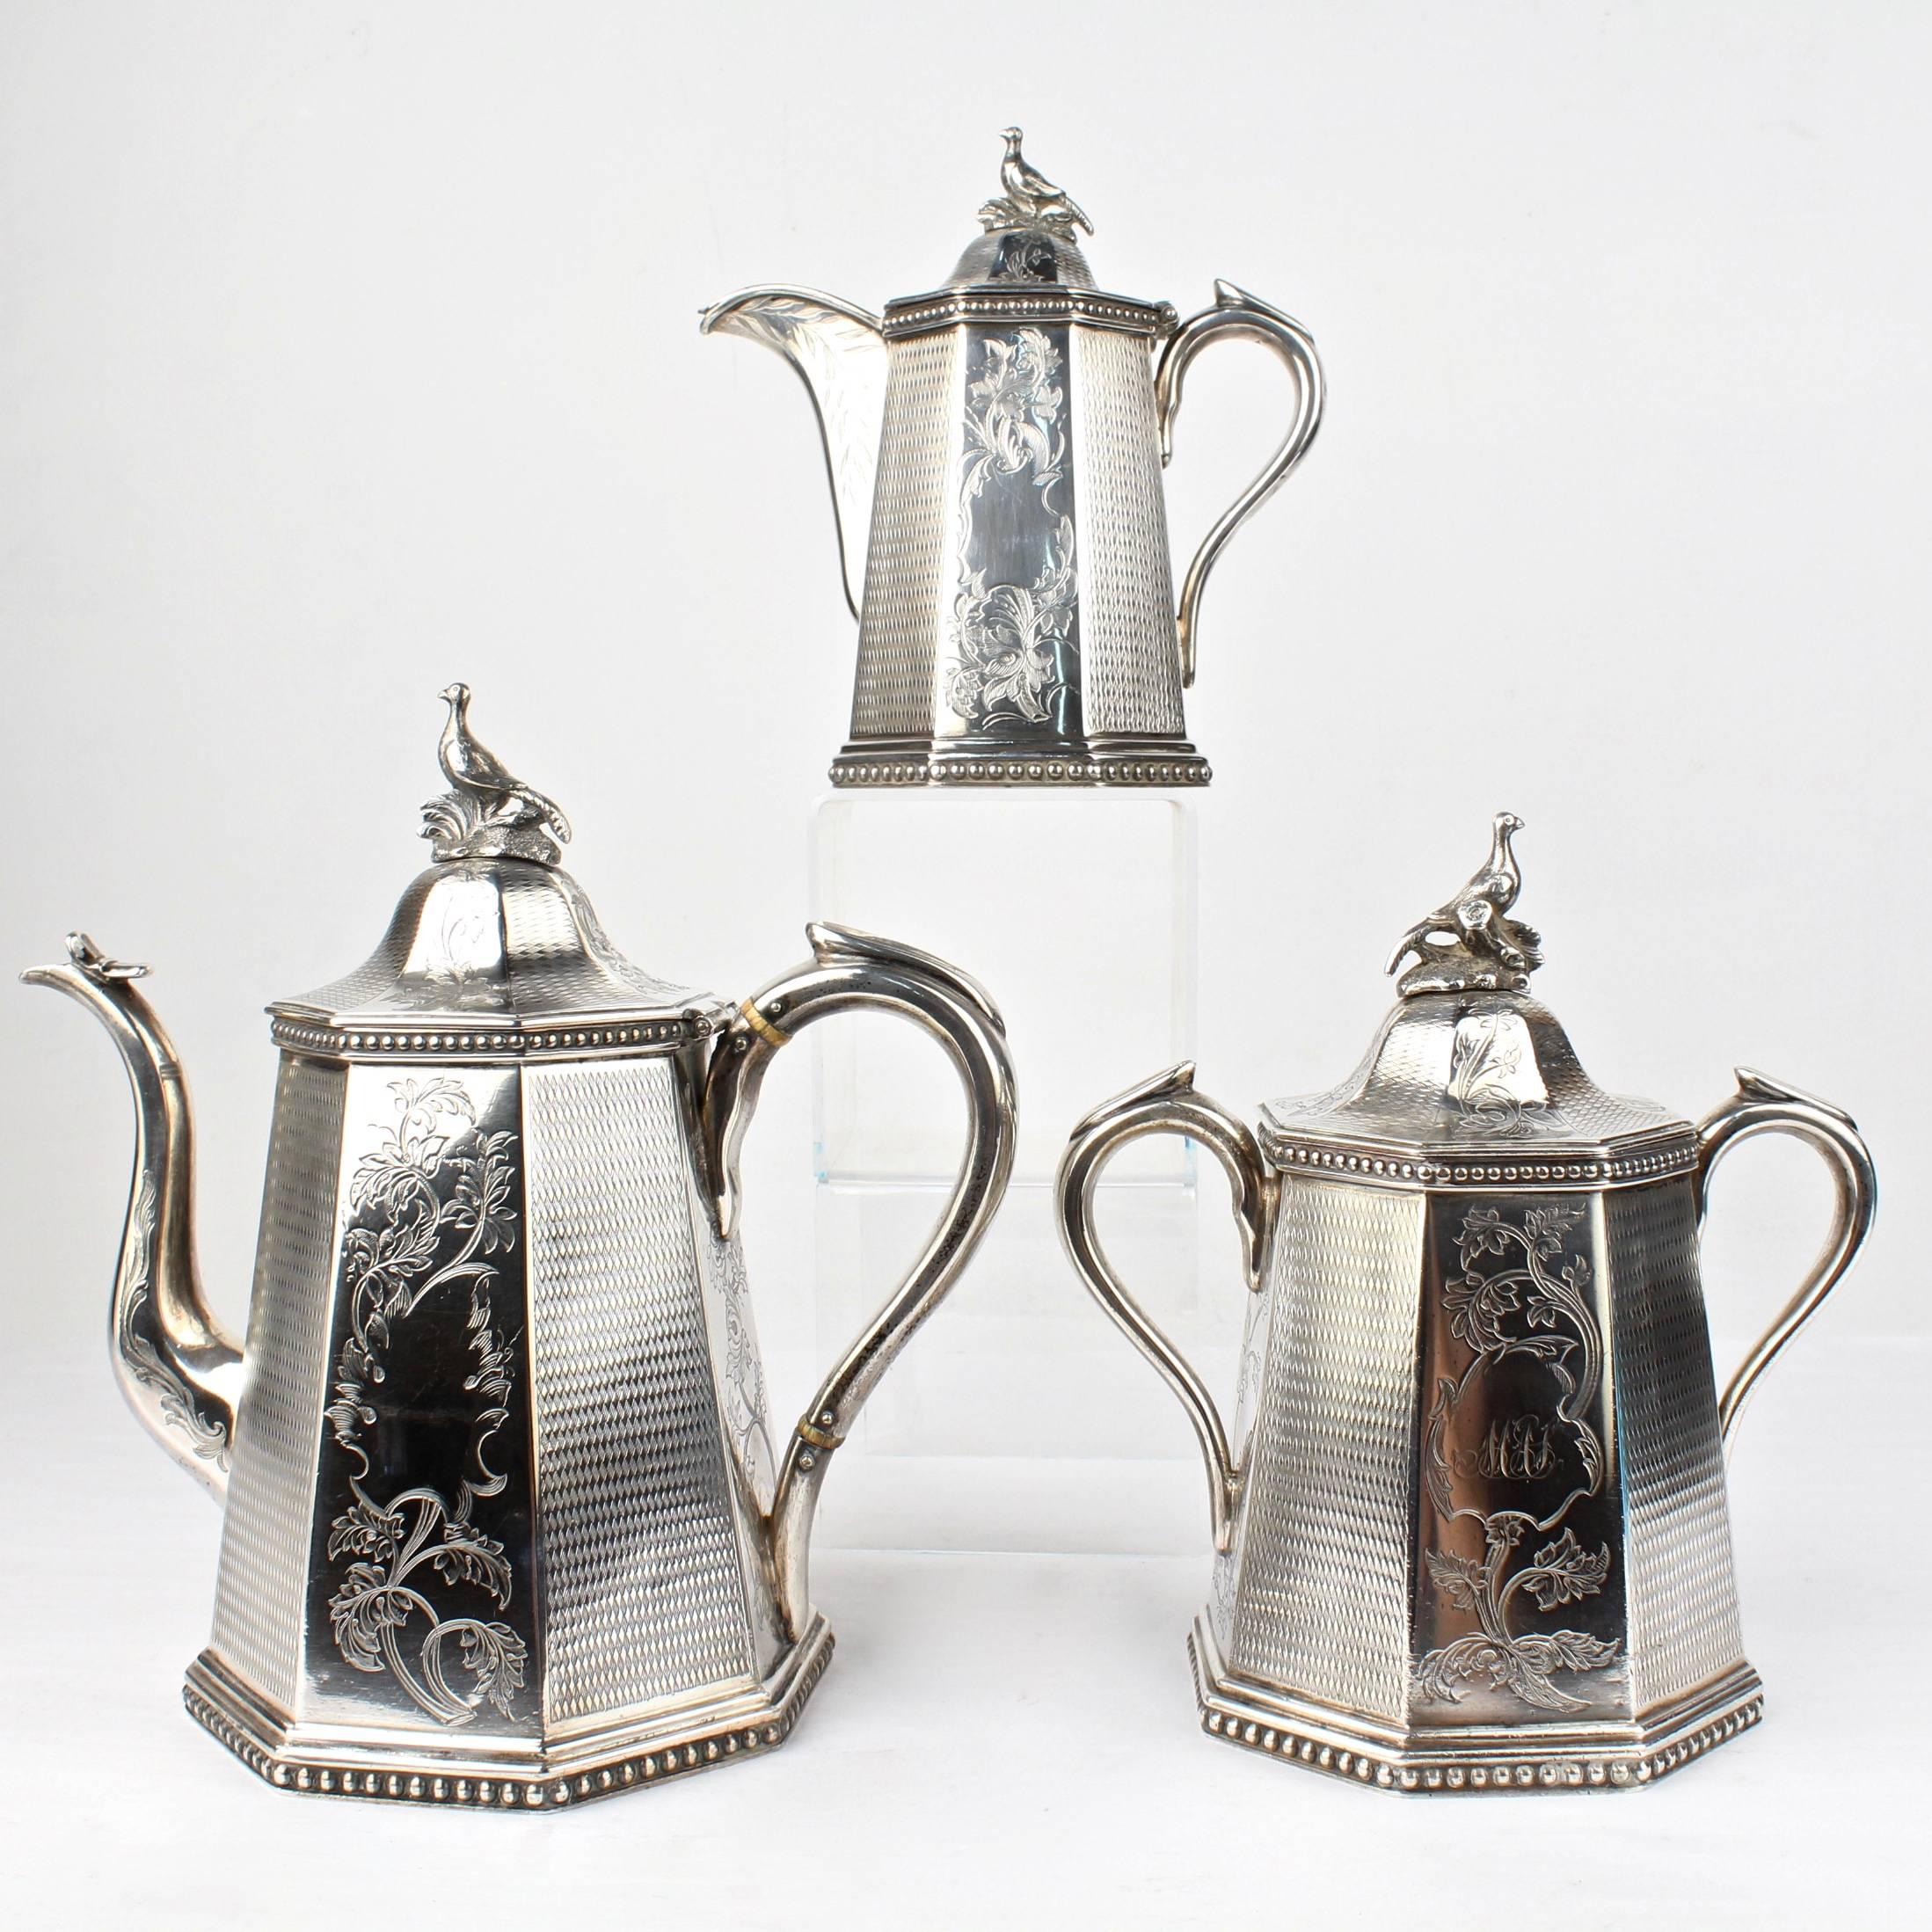 A heavy, three-piece, 19th century American coin silver tea set by the renowned New York silversmiths, Wood & Hughes.

Finely engraved with vine and leafwork panels that alternate with panels of etched diamond fields. The central cartouches each